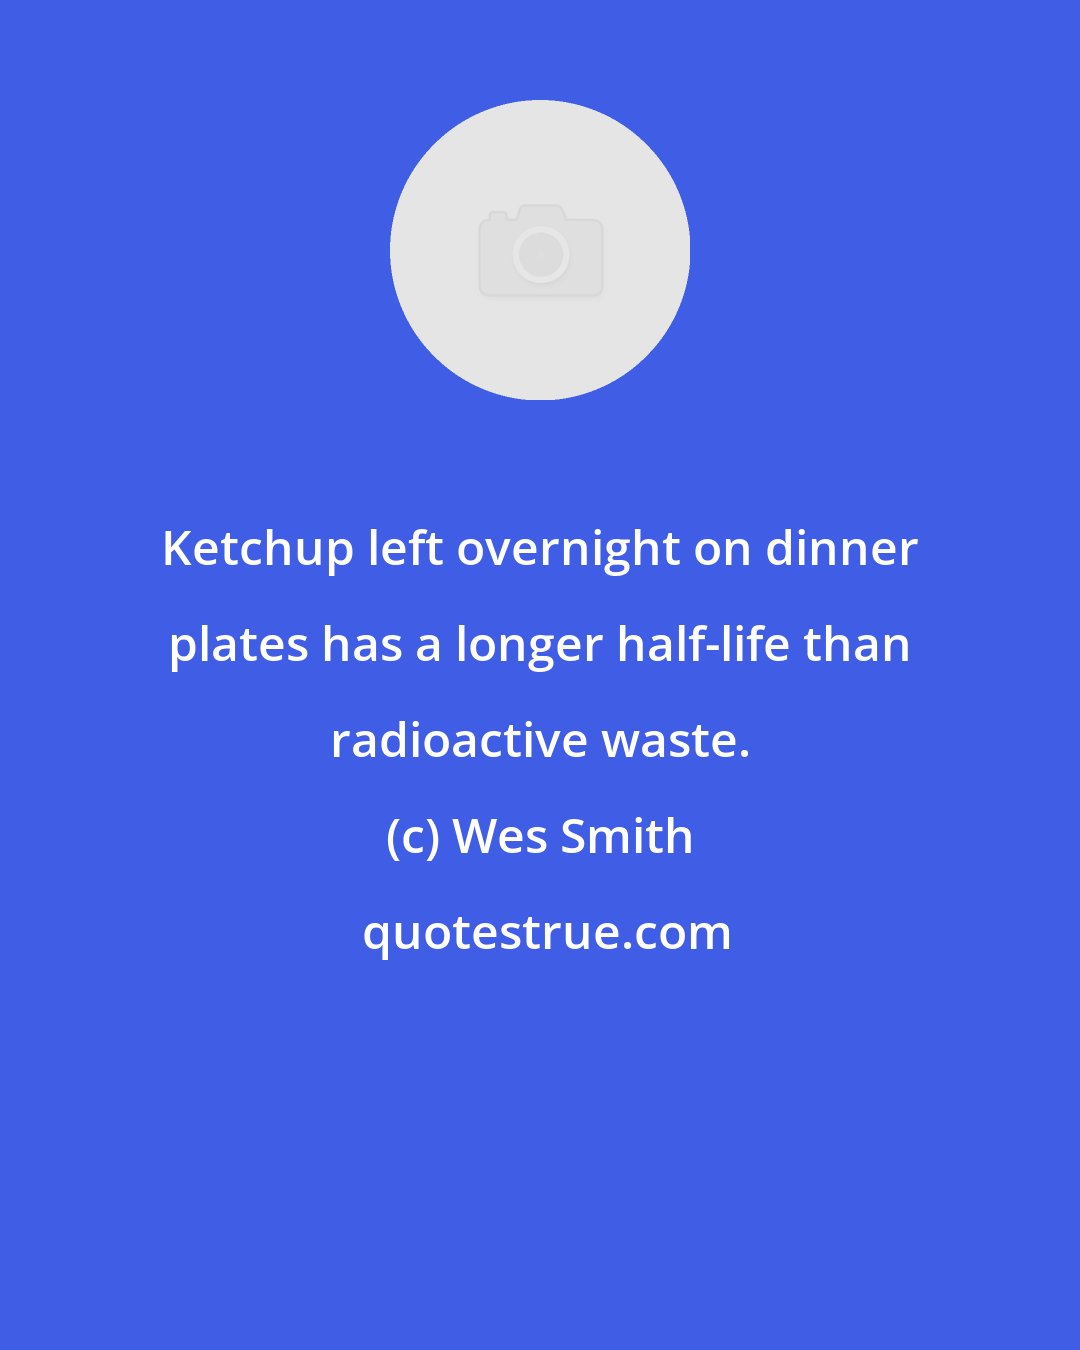 Wes Smith: Ketchup left overnight on dinner plates has a longer half-life than radioactive waste.